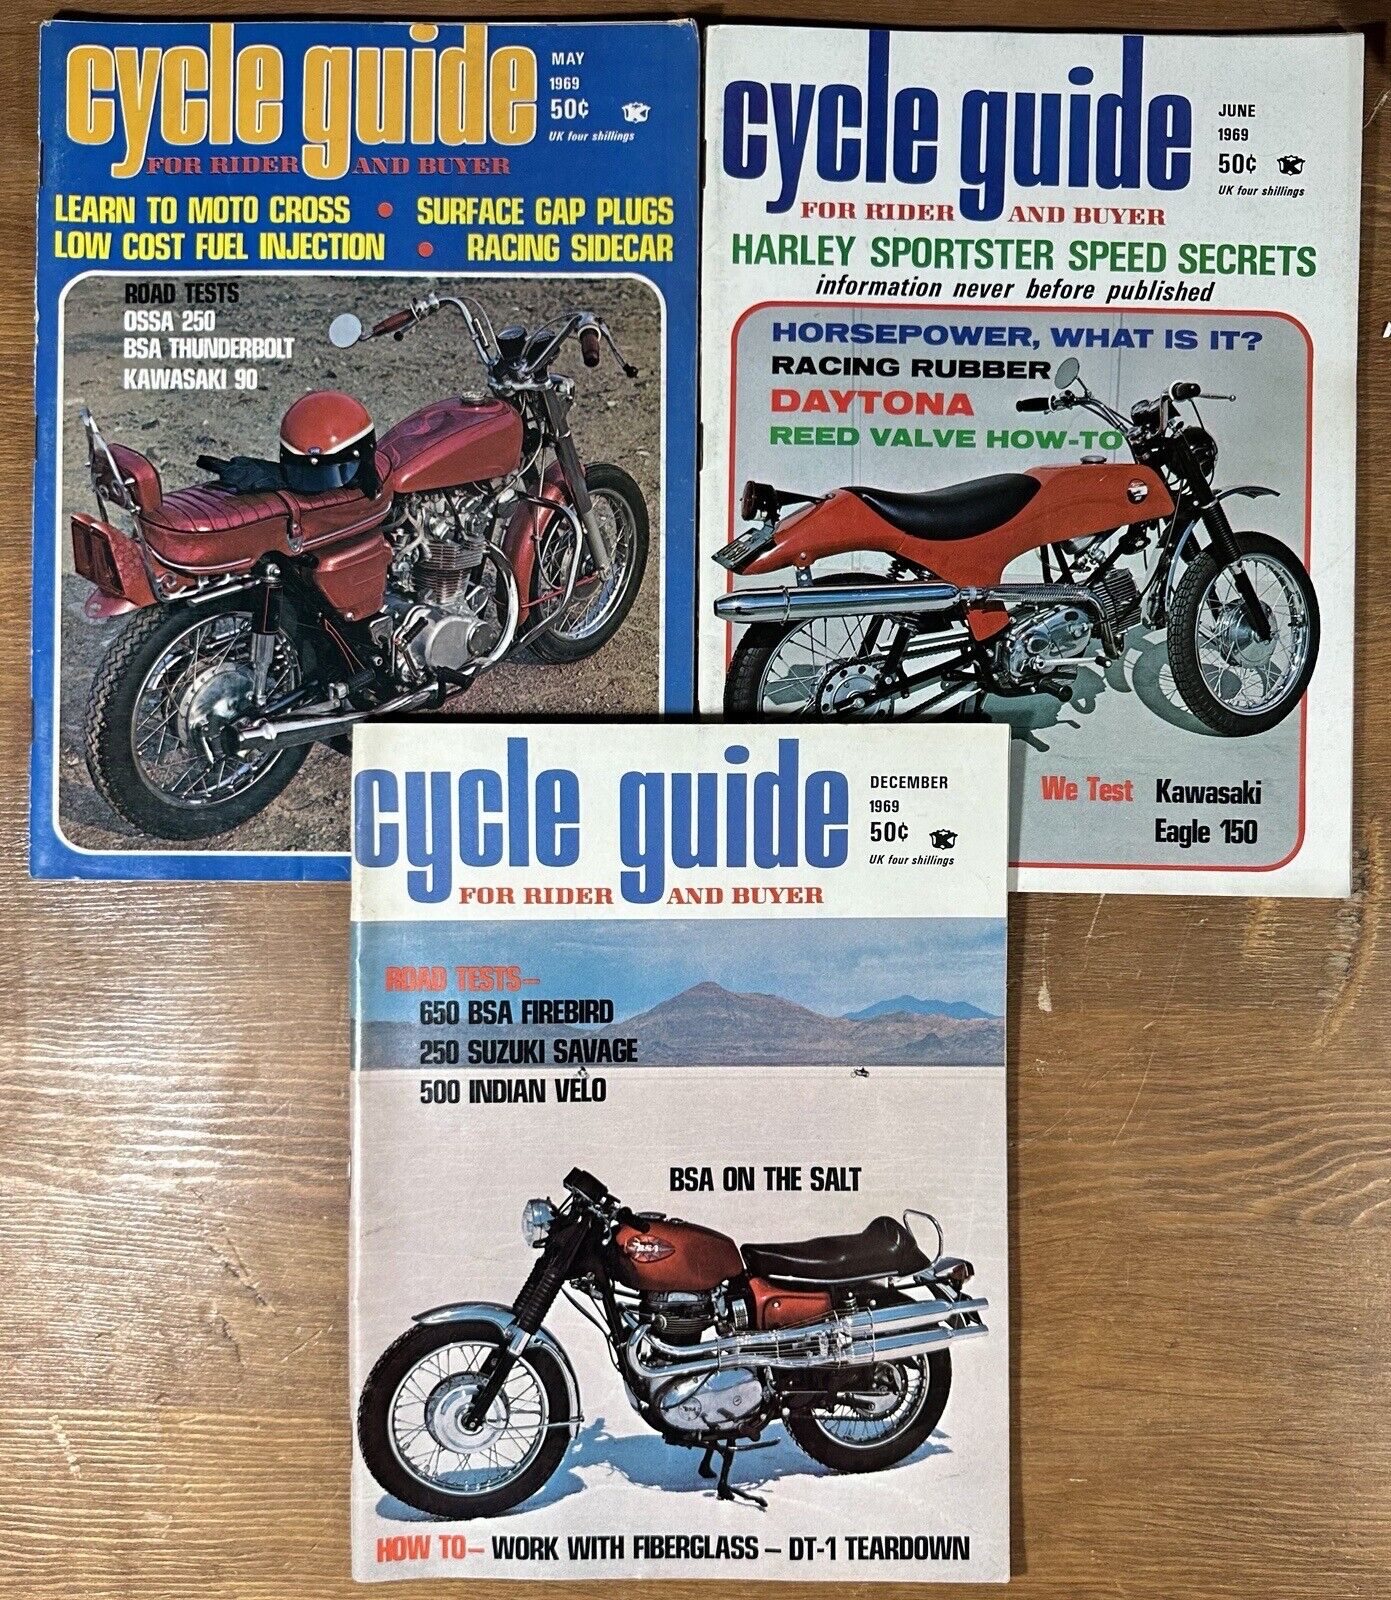 Vintage 1969 Cycle Guide For Rider & Buyer Magazine Lot 3 May June December